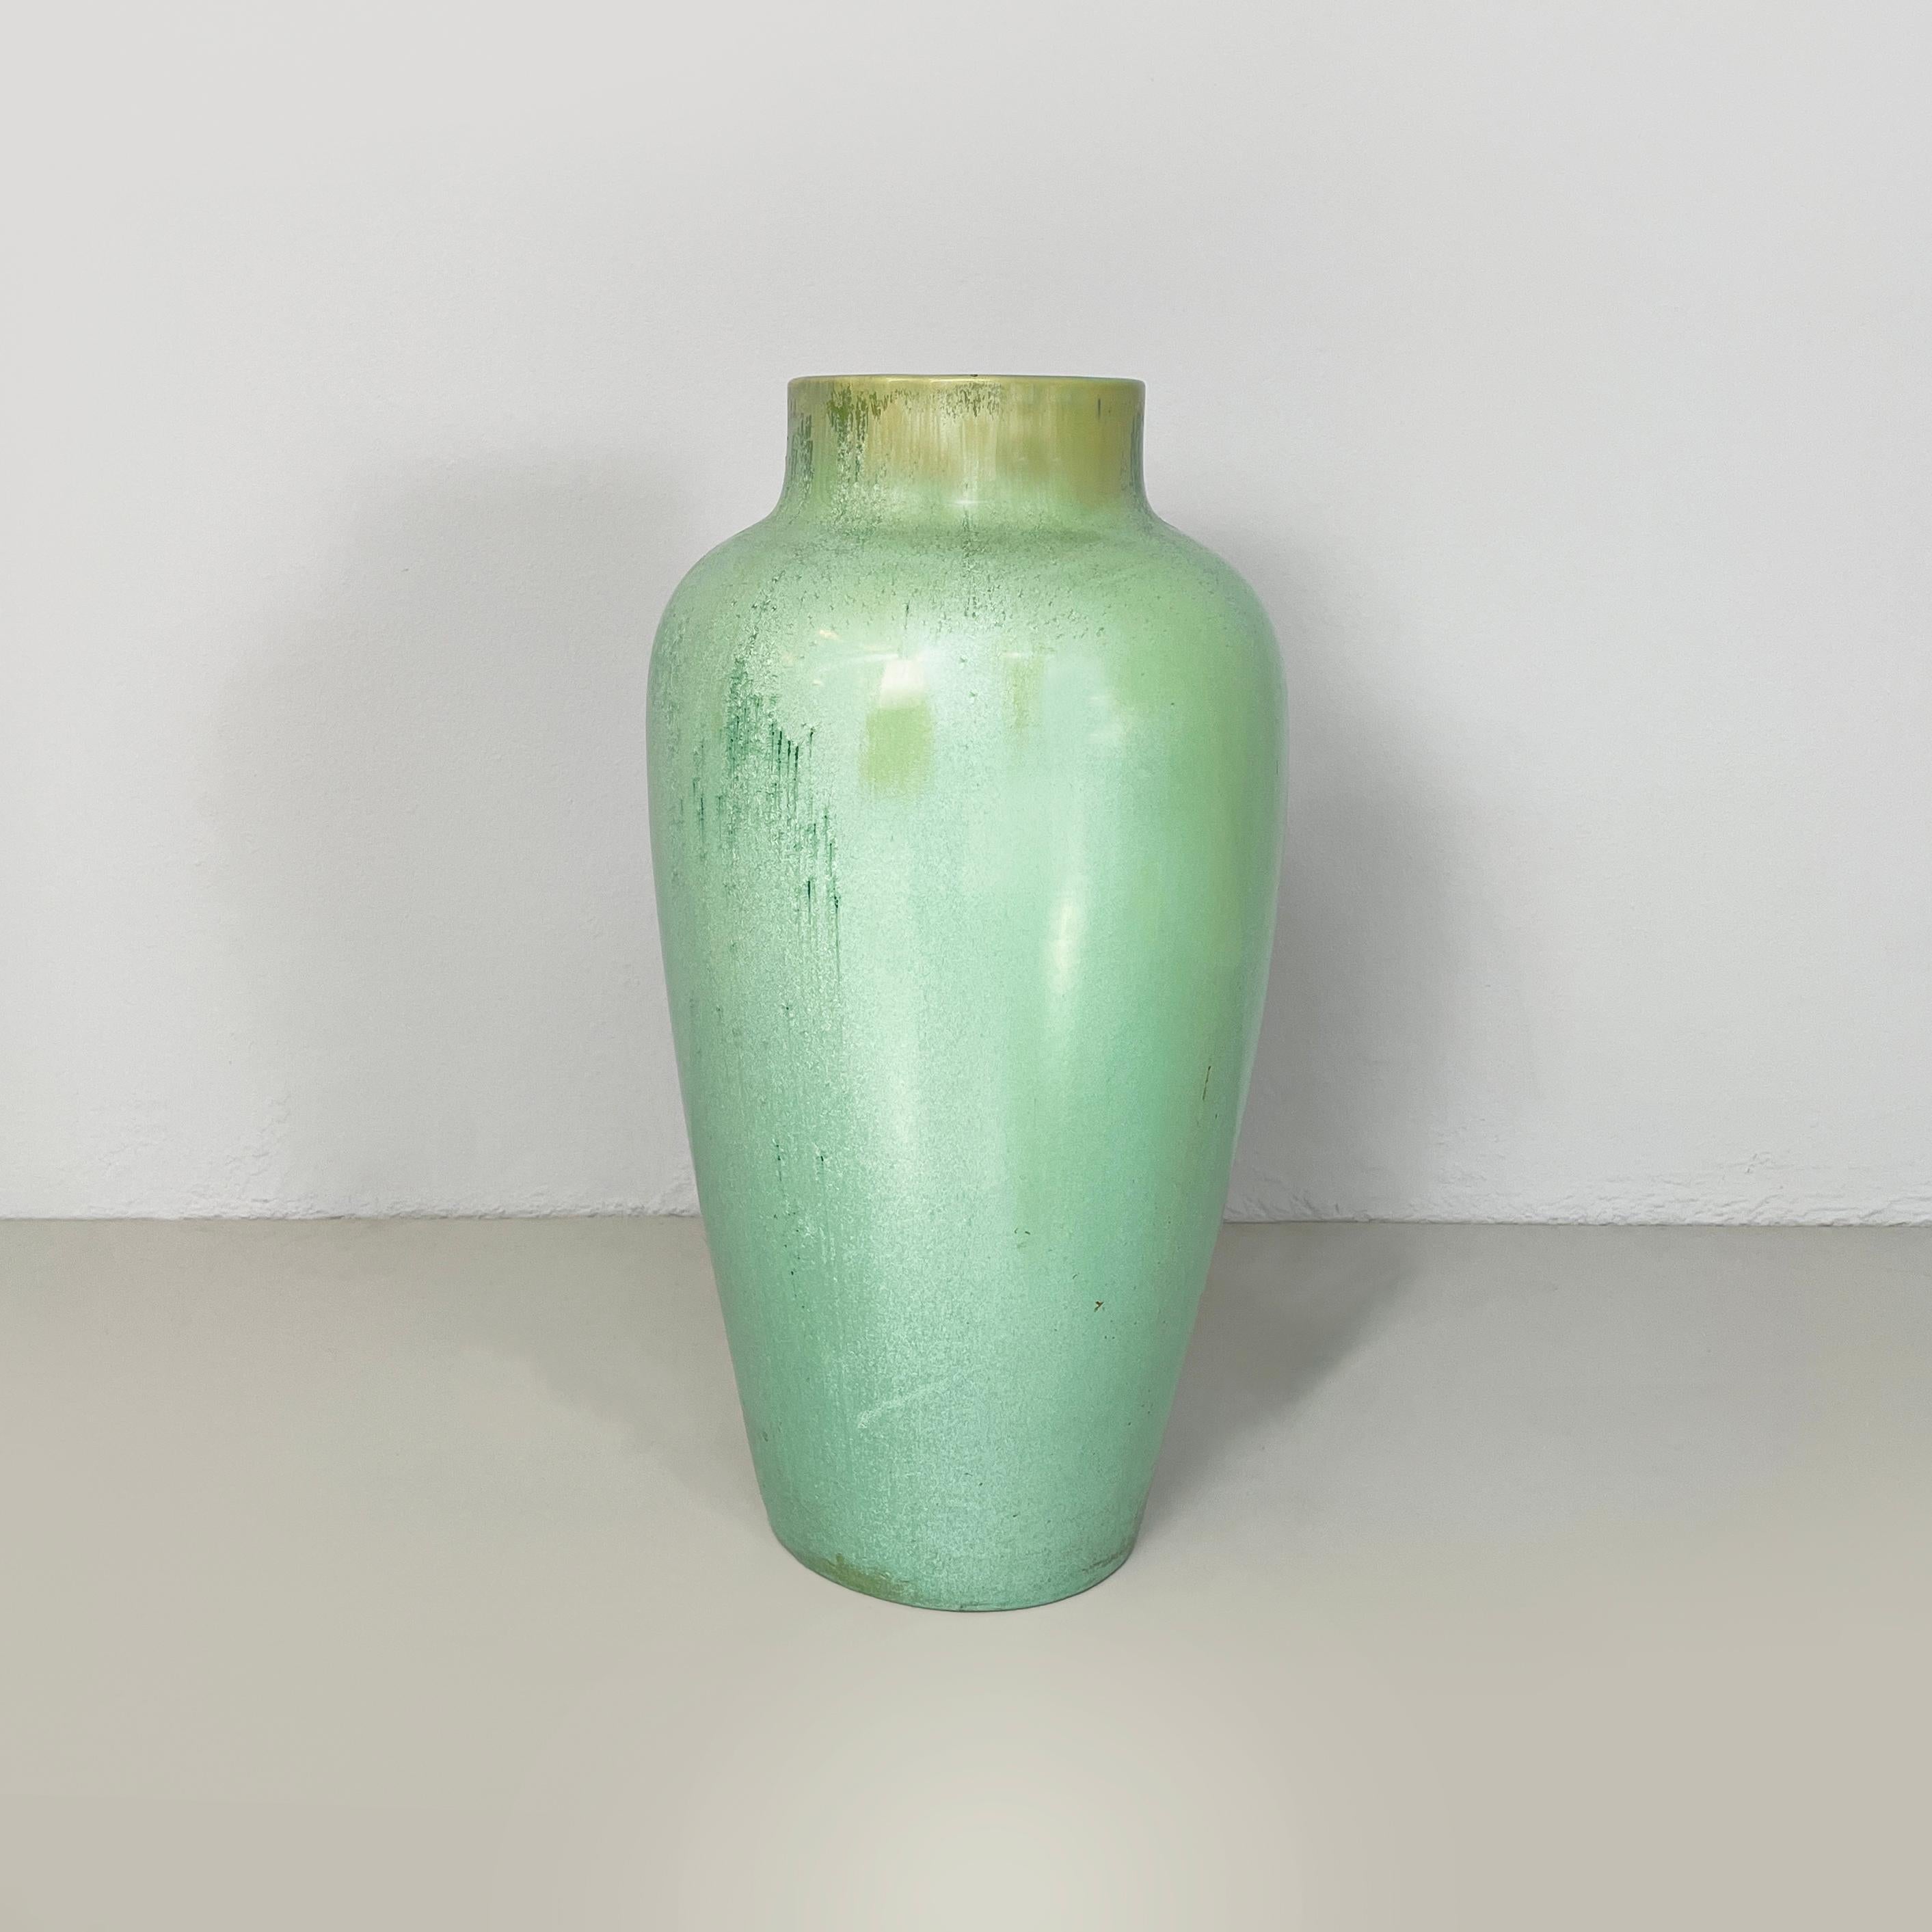 Italian mid-century modern Vase in glazed ceramic by Guido Andlovitz, 1940s
Fantastic and vintage fall vase with round base in green glazed ceramic. The vase has a round hole at the top. The structure tends to widen in the center and narrow at the